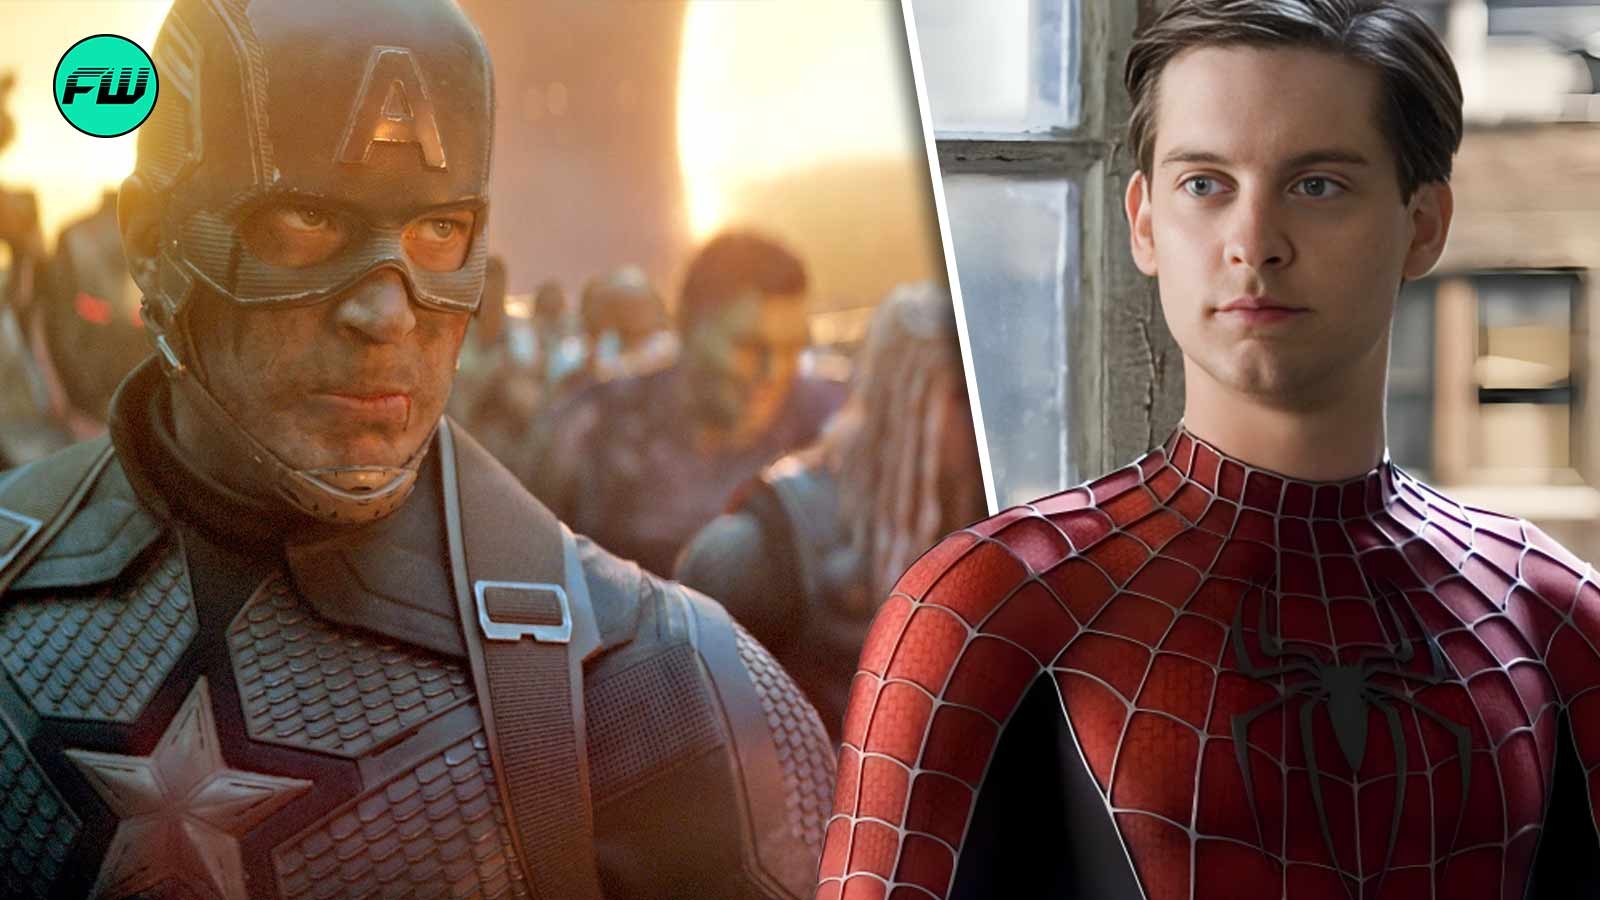 Kevin Feige’s merger of Tobey Maguire’s Spider-Man and other Marvel franchises could have ended badly